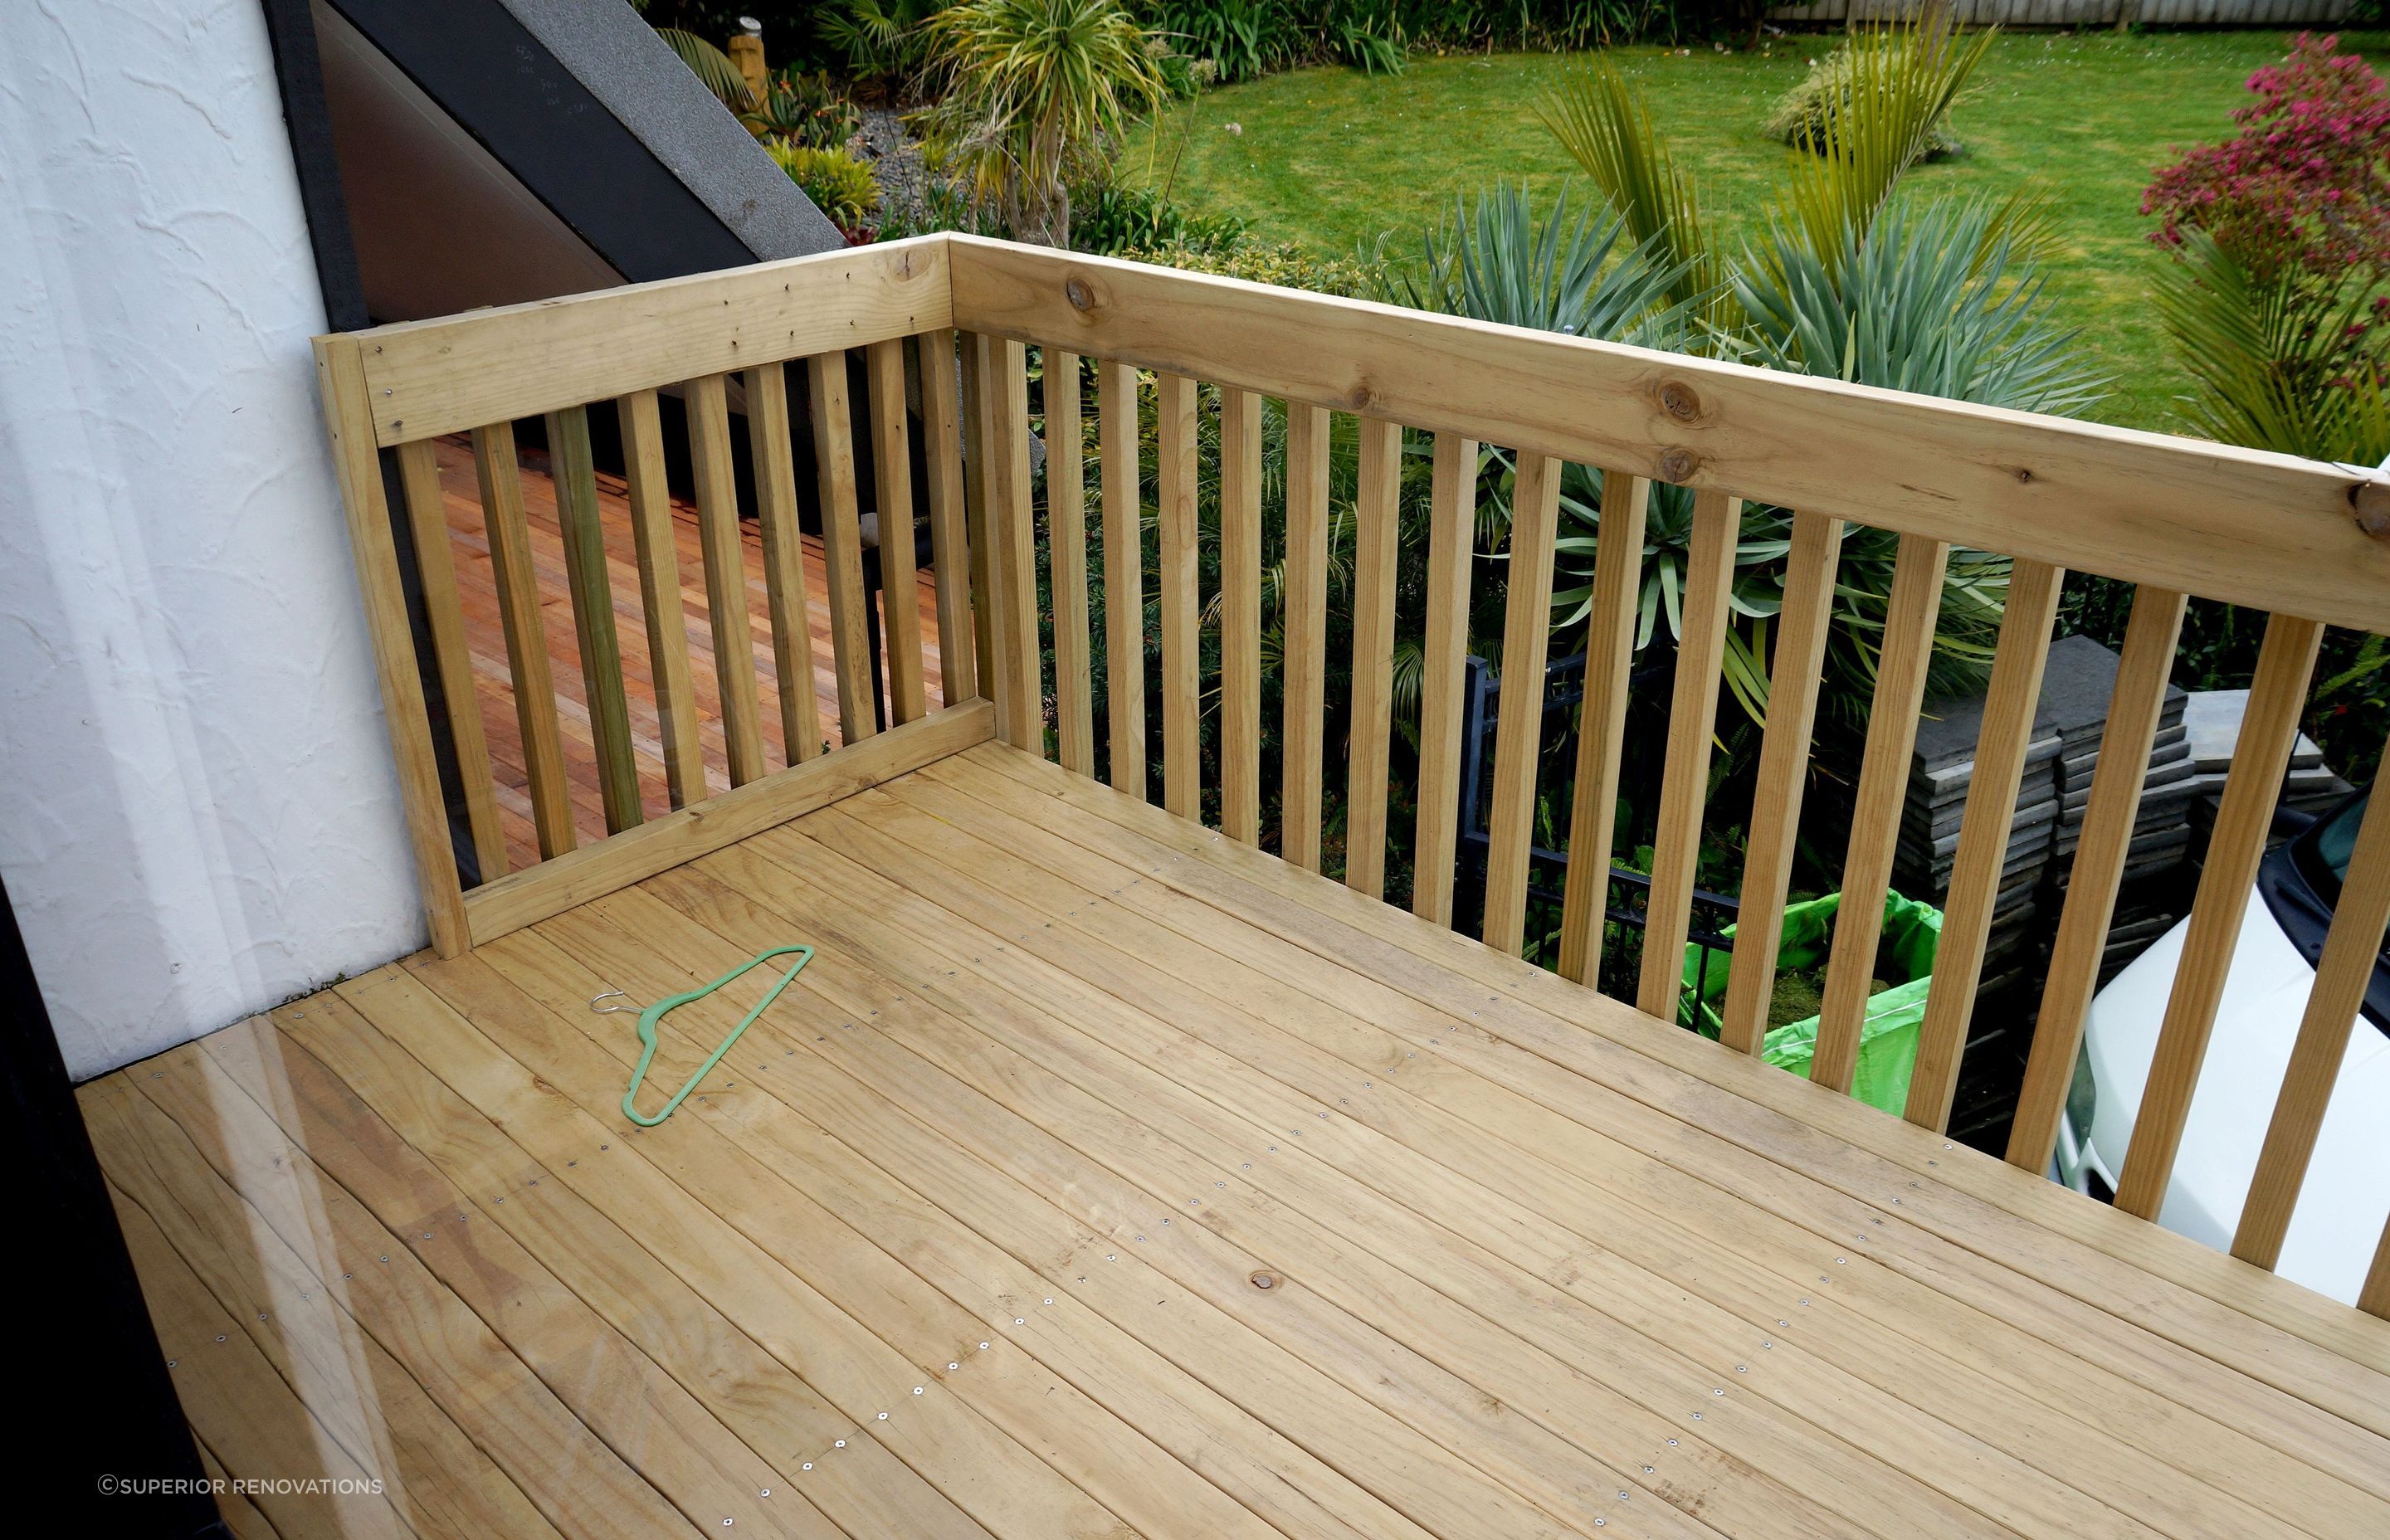 Timber deck built on the second level of the house with Pine which leads from the master bedroom suite.